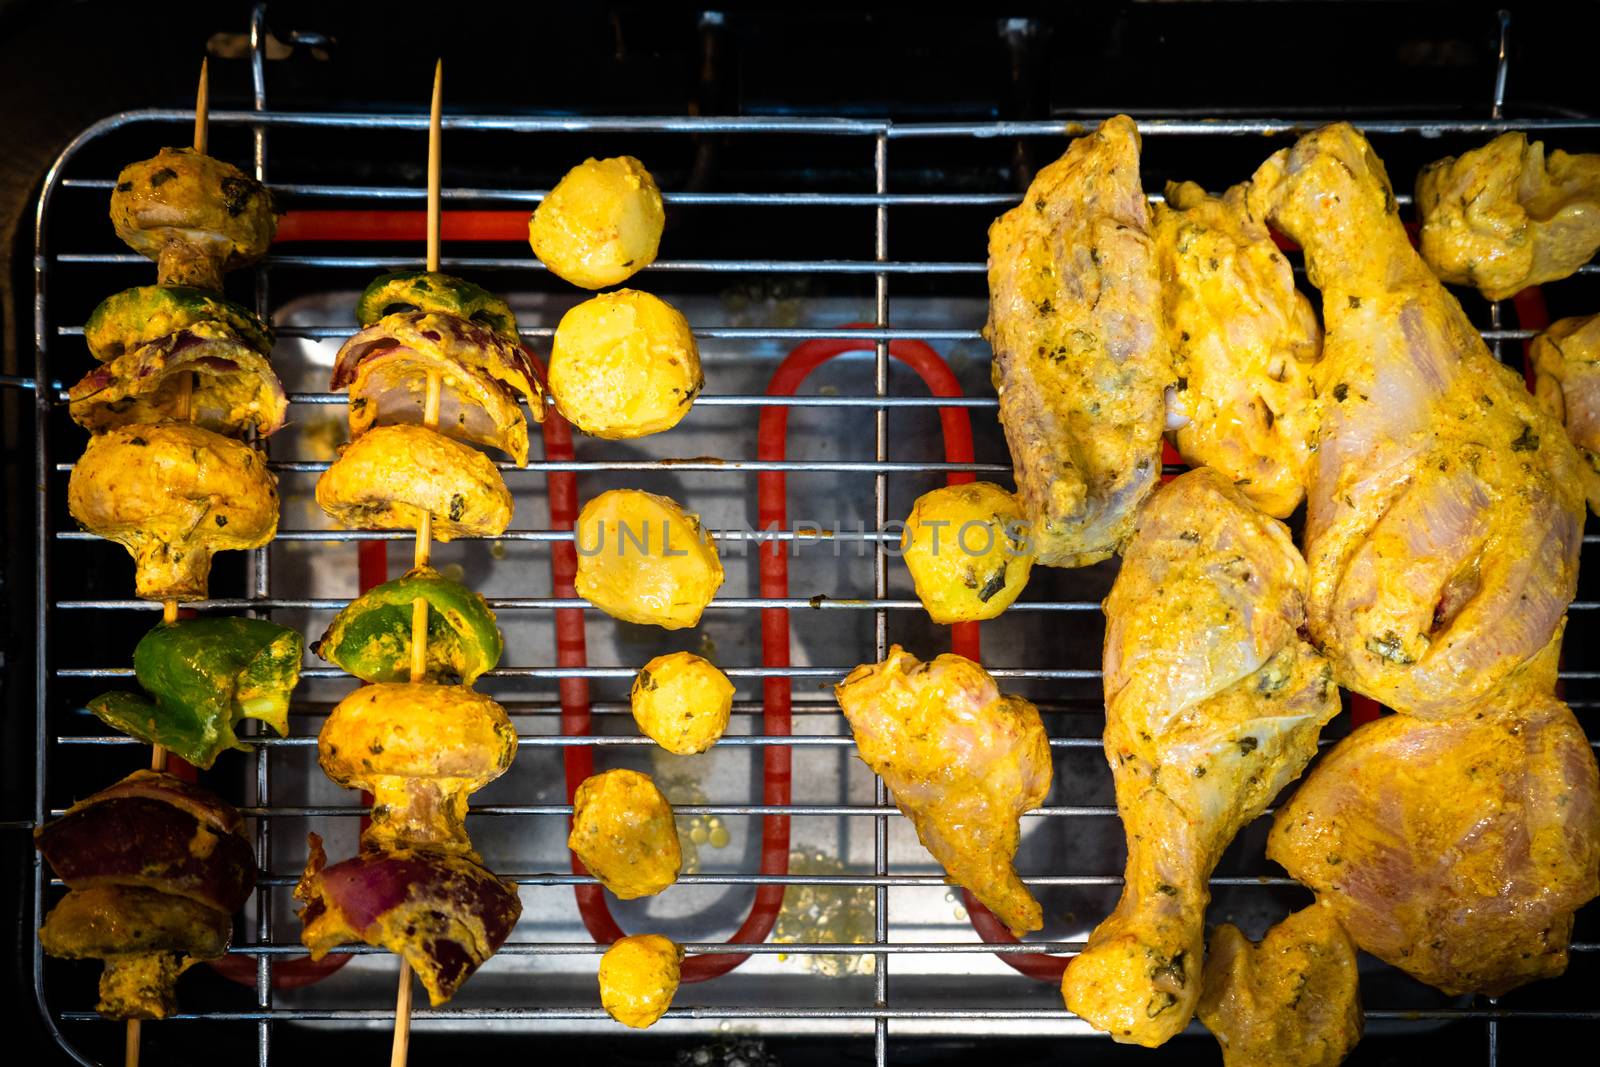 Top flatlay view showing chicken cooking on one side and vegetables cooking on the other over a electric grill . Concept showing the choice of vegetarian or non vegetarian cuisine in a person's life